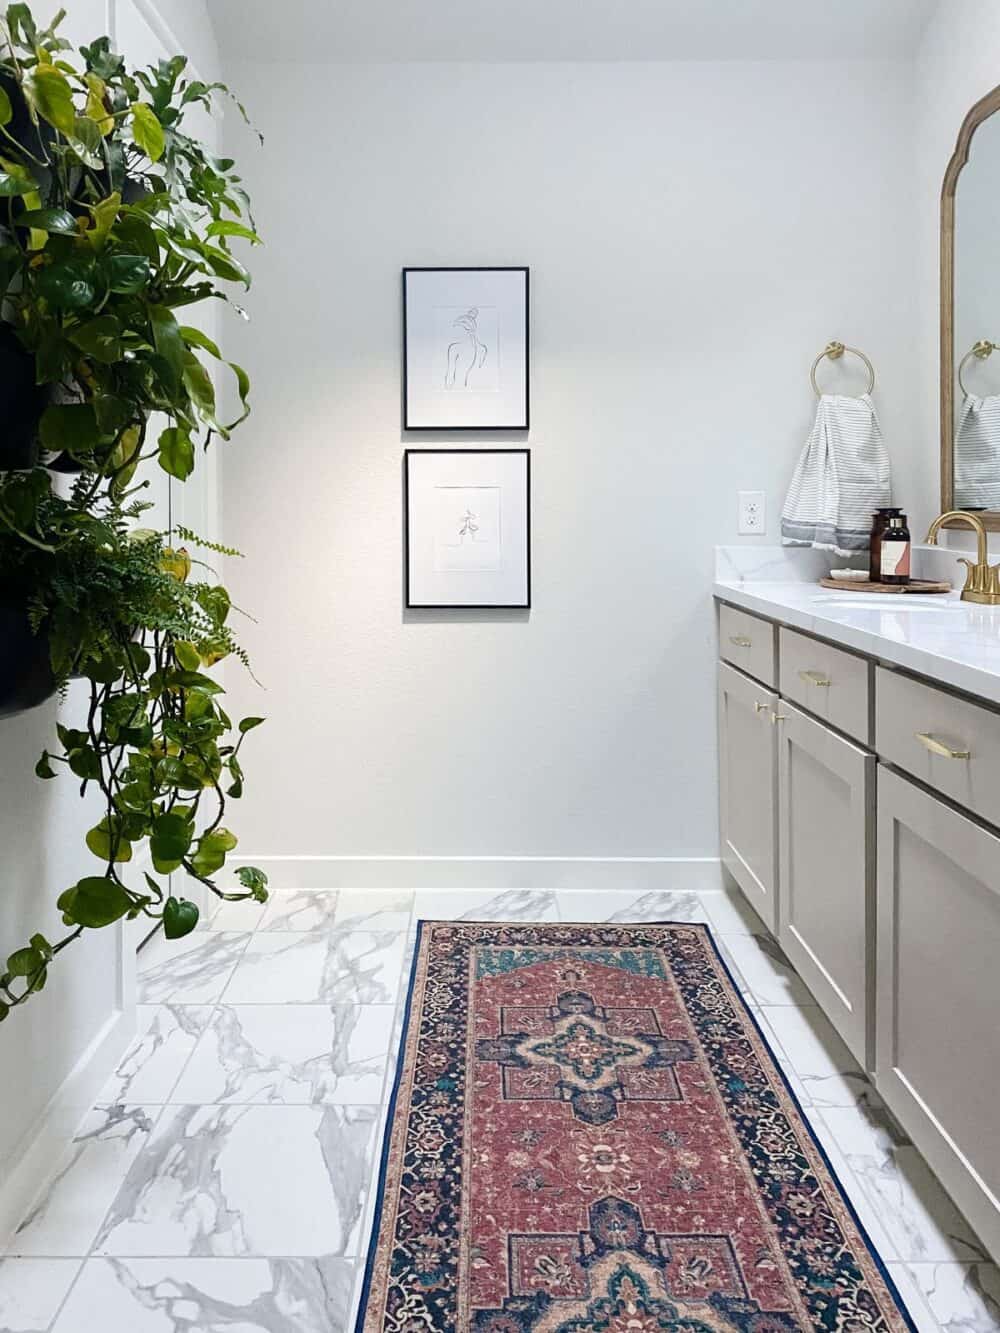 Master bathroom after renovation, with a plant wall and a red runner 